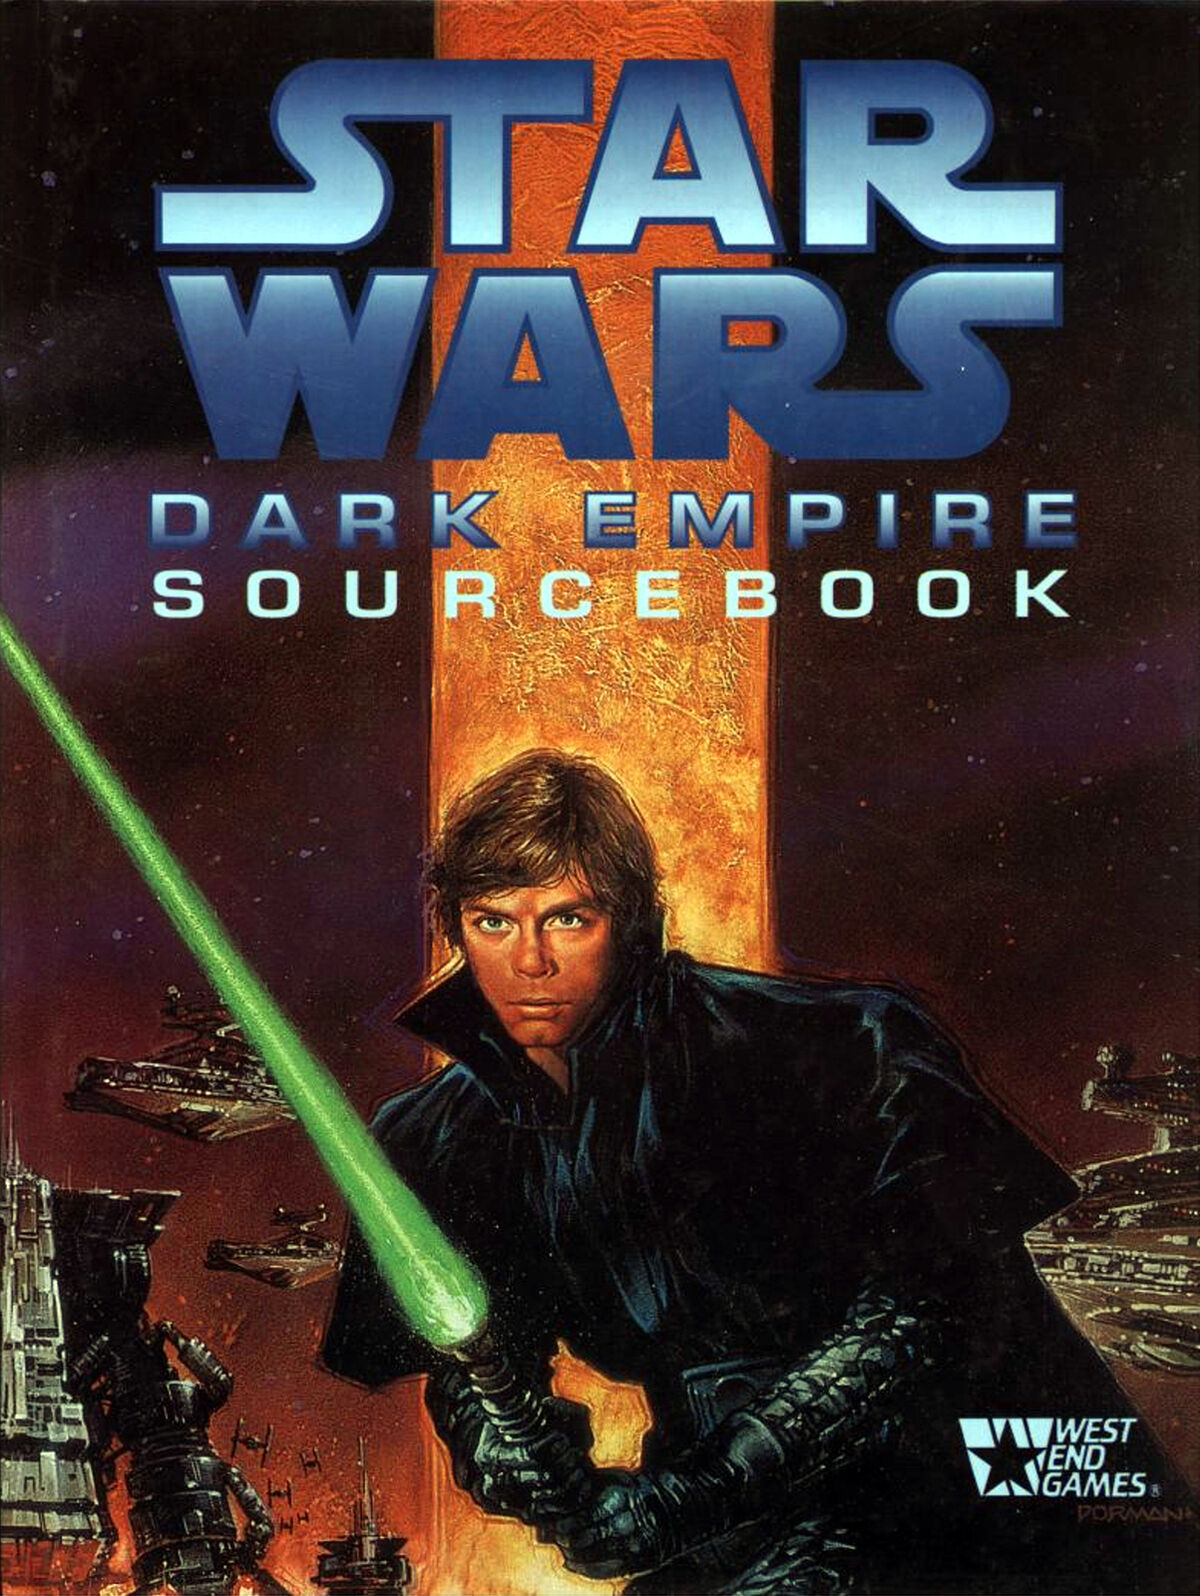 Han Solo and the Corporate Sector Sourcebook Star Wars RPG, Michael Allen  Horne